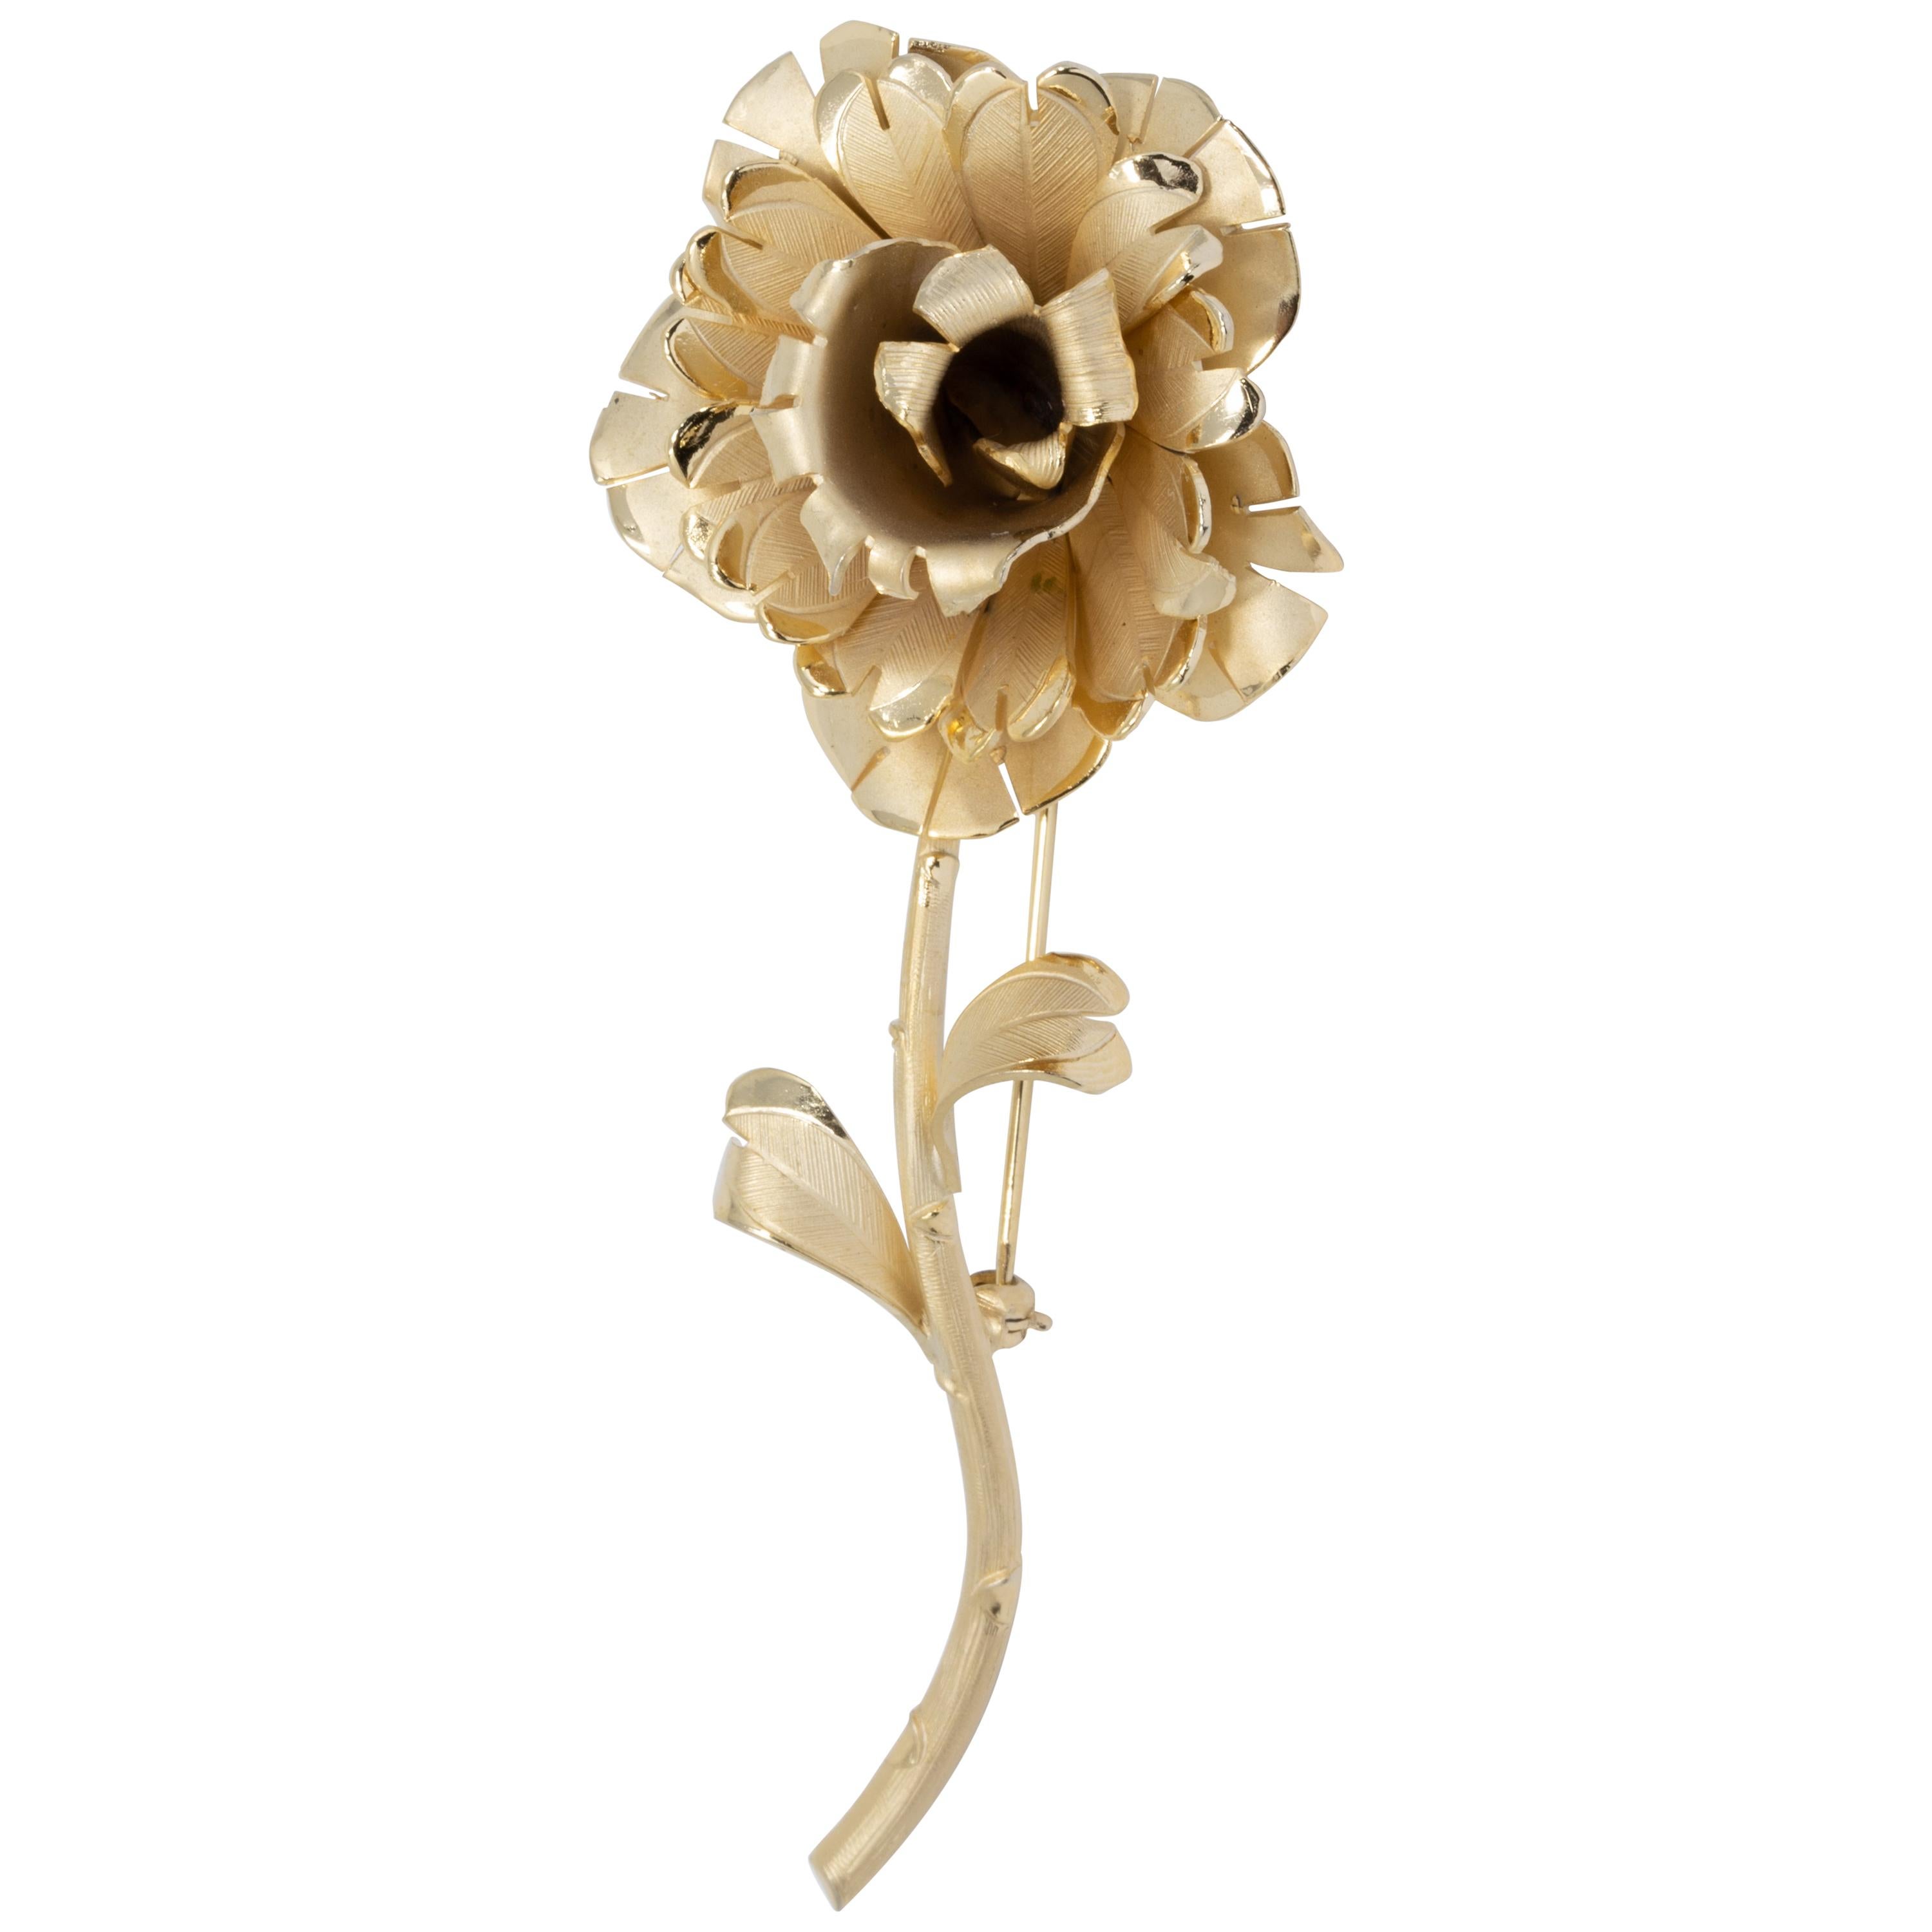 Primex Golden Flower Pin Brooch with Layered Textured Petals For Sale